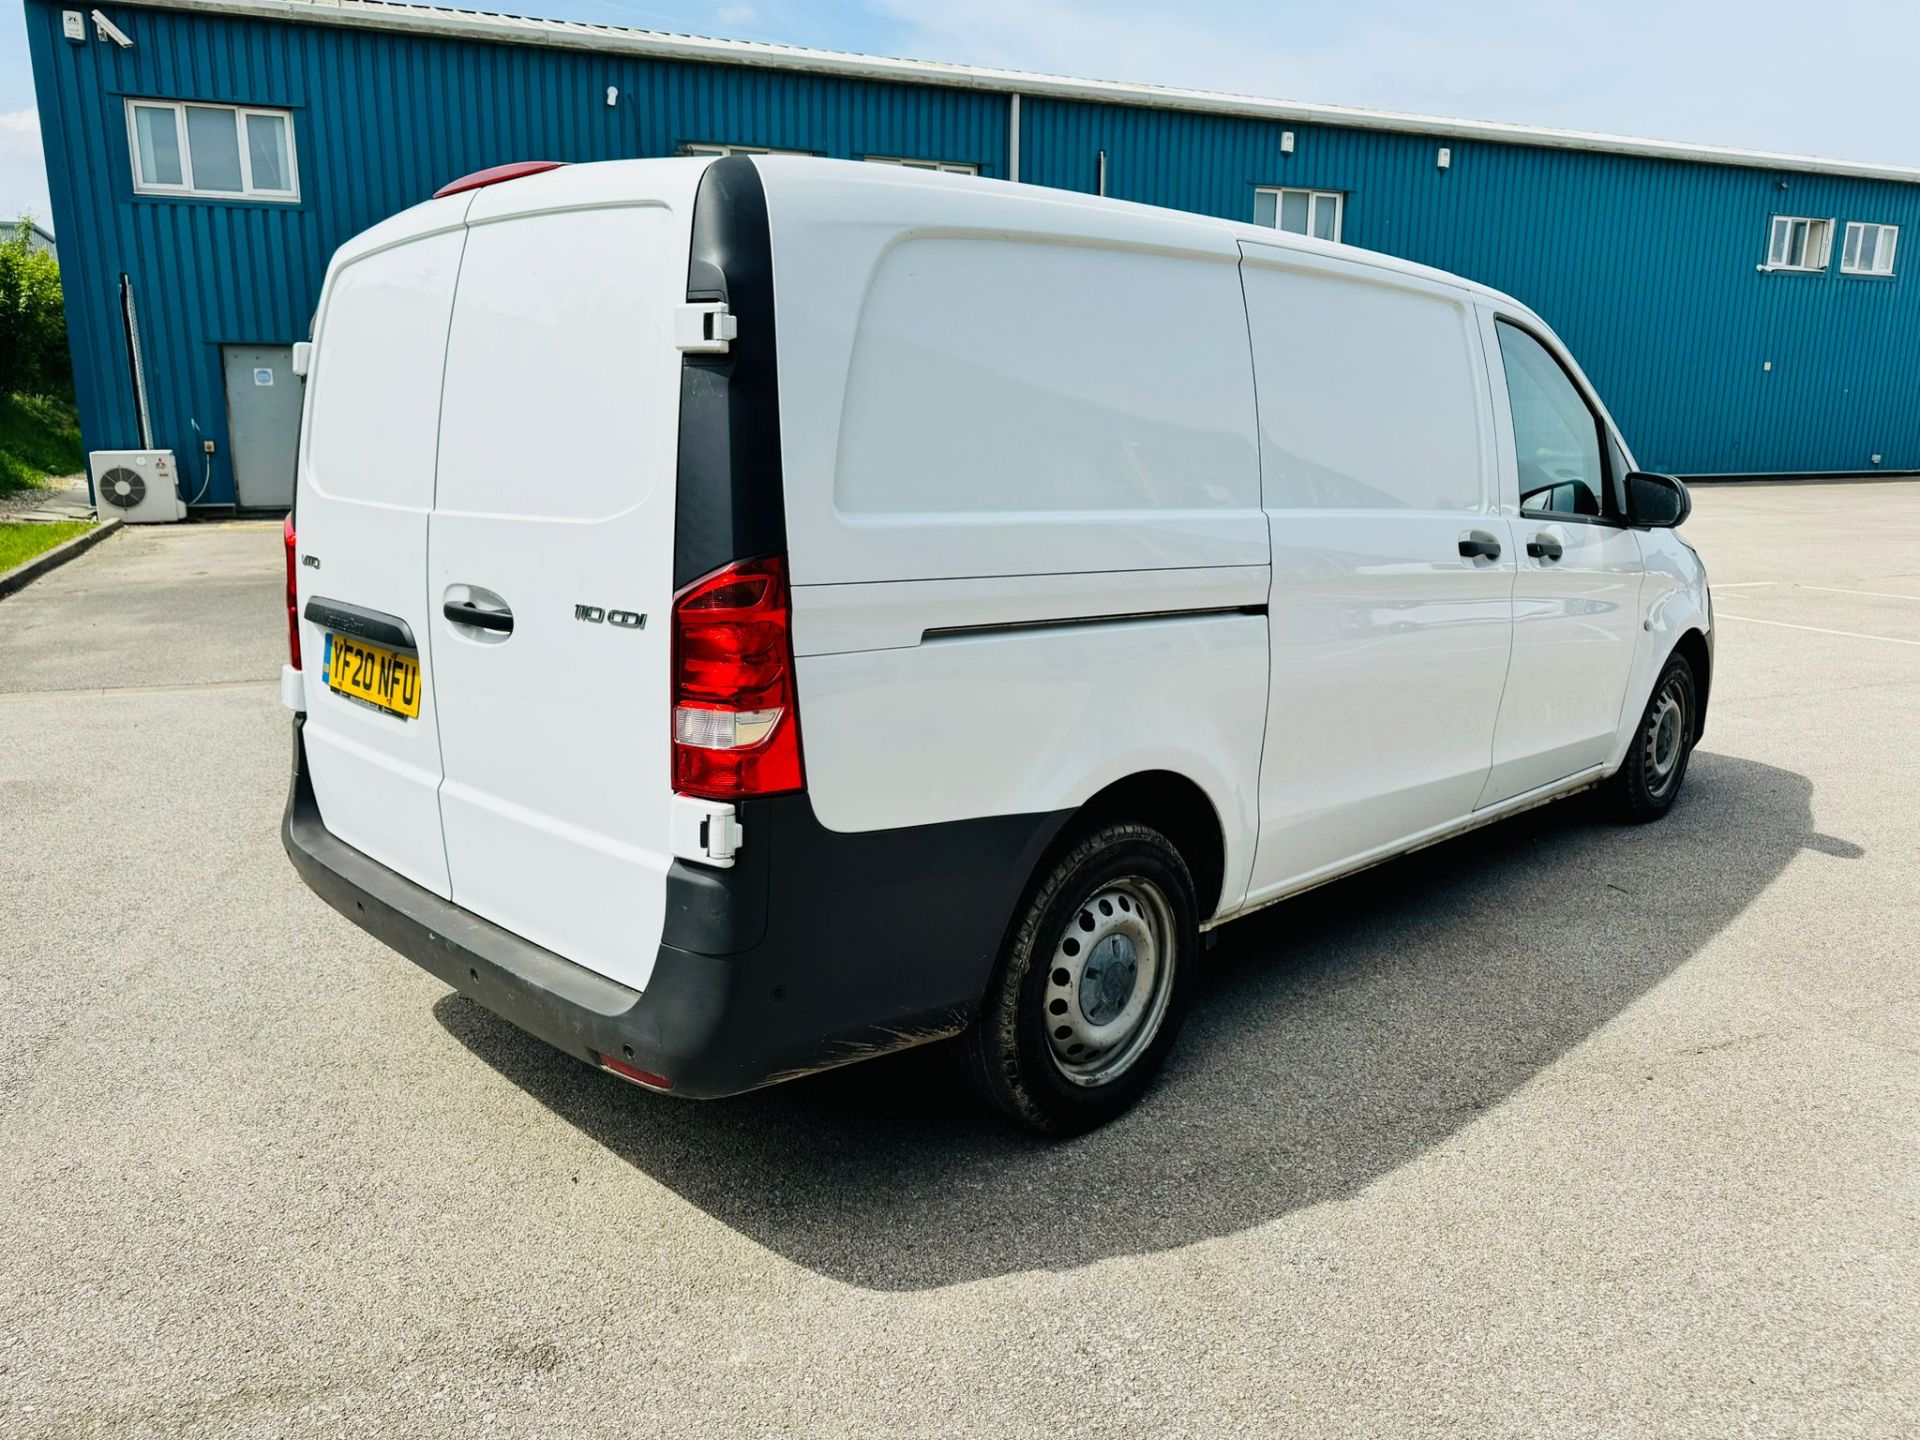 MERCEDES BENZ VITO CDI PURE - 2020 20 Reg - Only 74k Miles - 1 Owner From New - Parking Sensors - Image 5 of 21